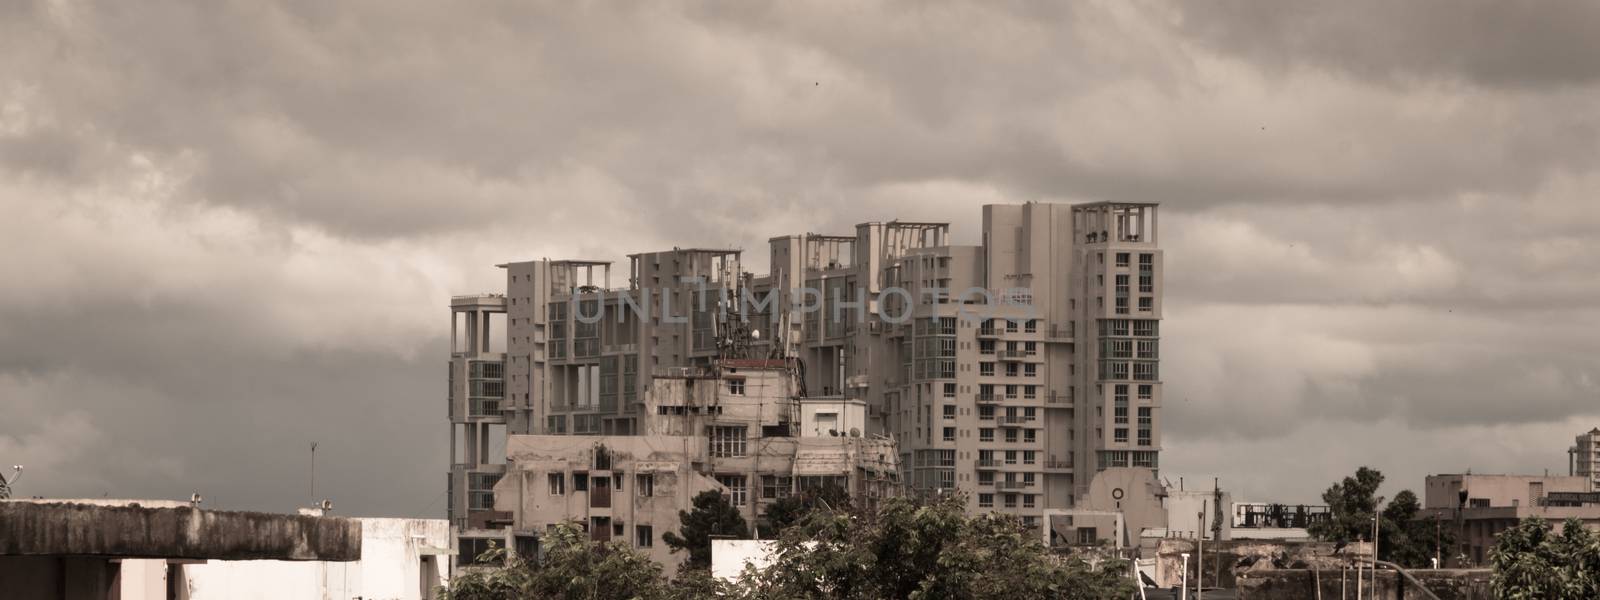 Storms dark early monsoons over modern residential skyscrapers. Kolkata, Bengal India. Monsoon Rainy day city in evening. Heavy Stormy rain clouds up above highrise. A landscape nature Photography.